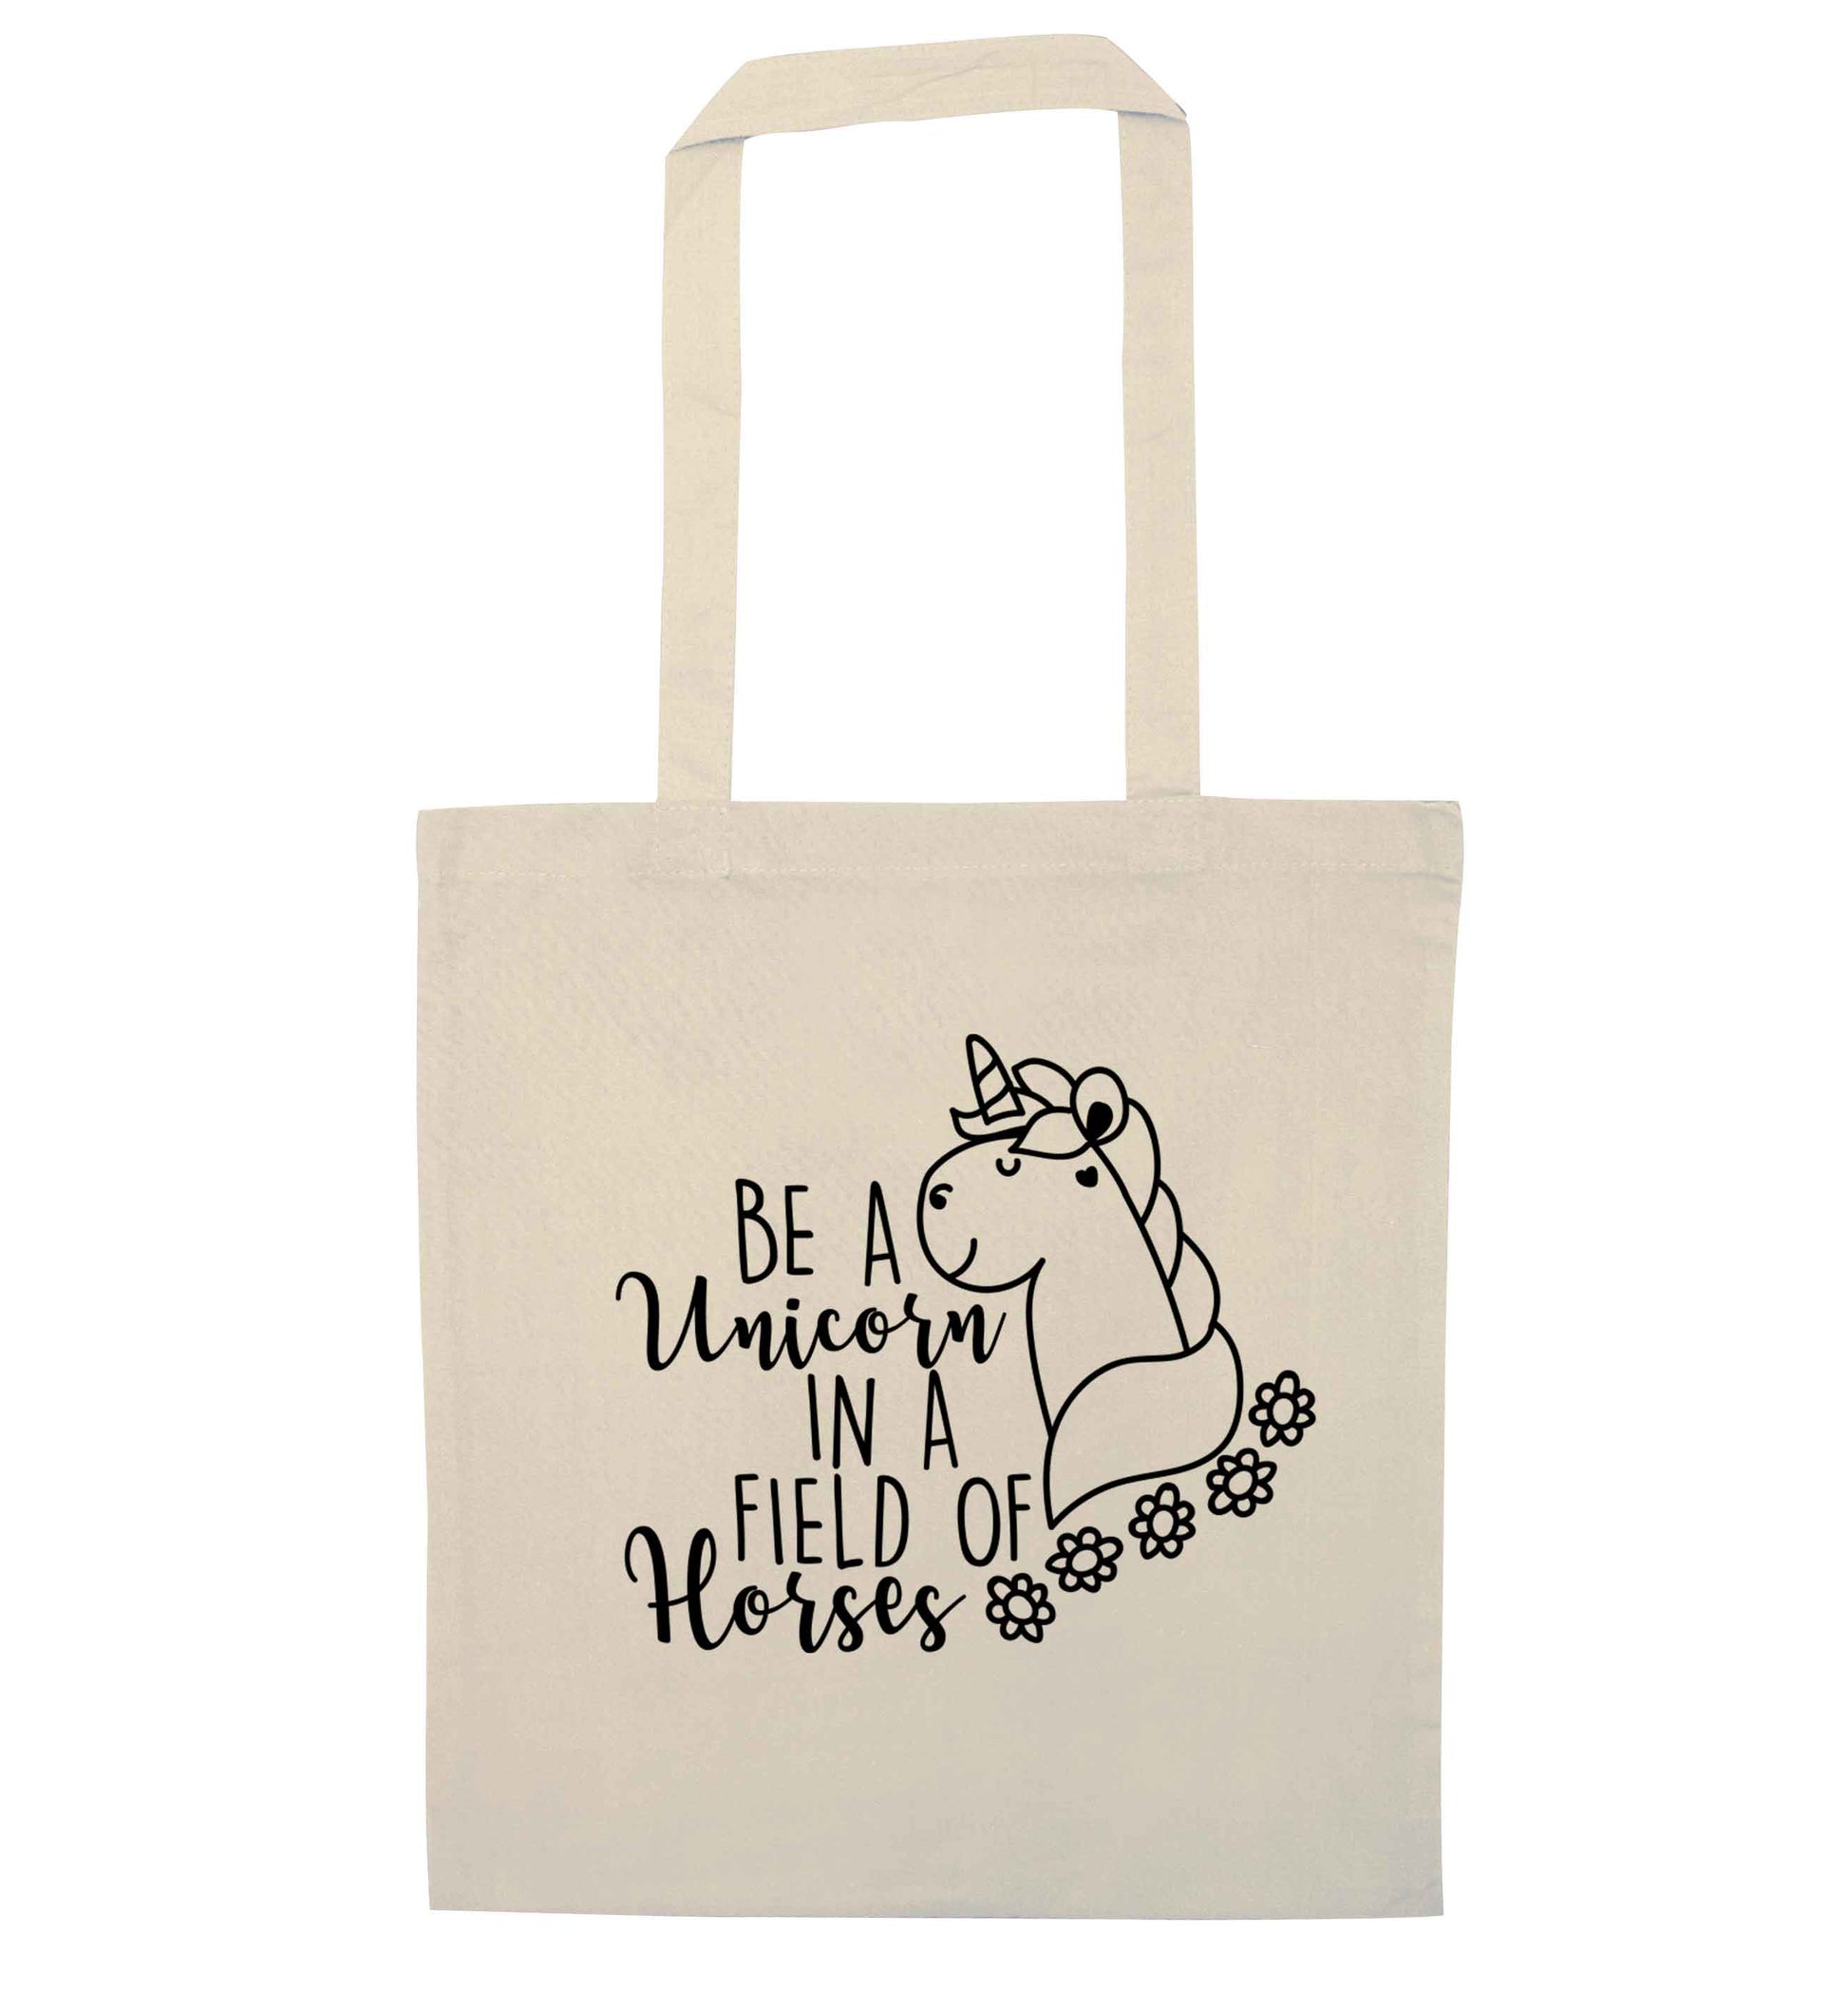 Be a unicorn in a field of horses natural tote bag